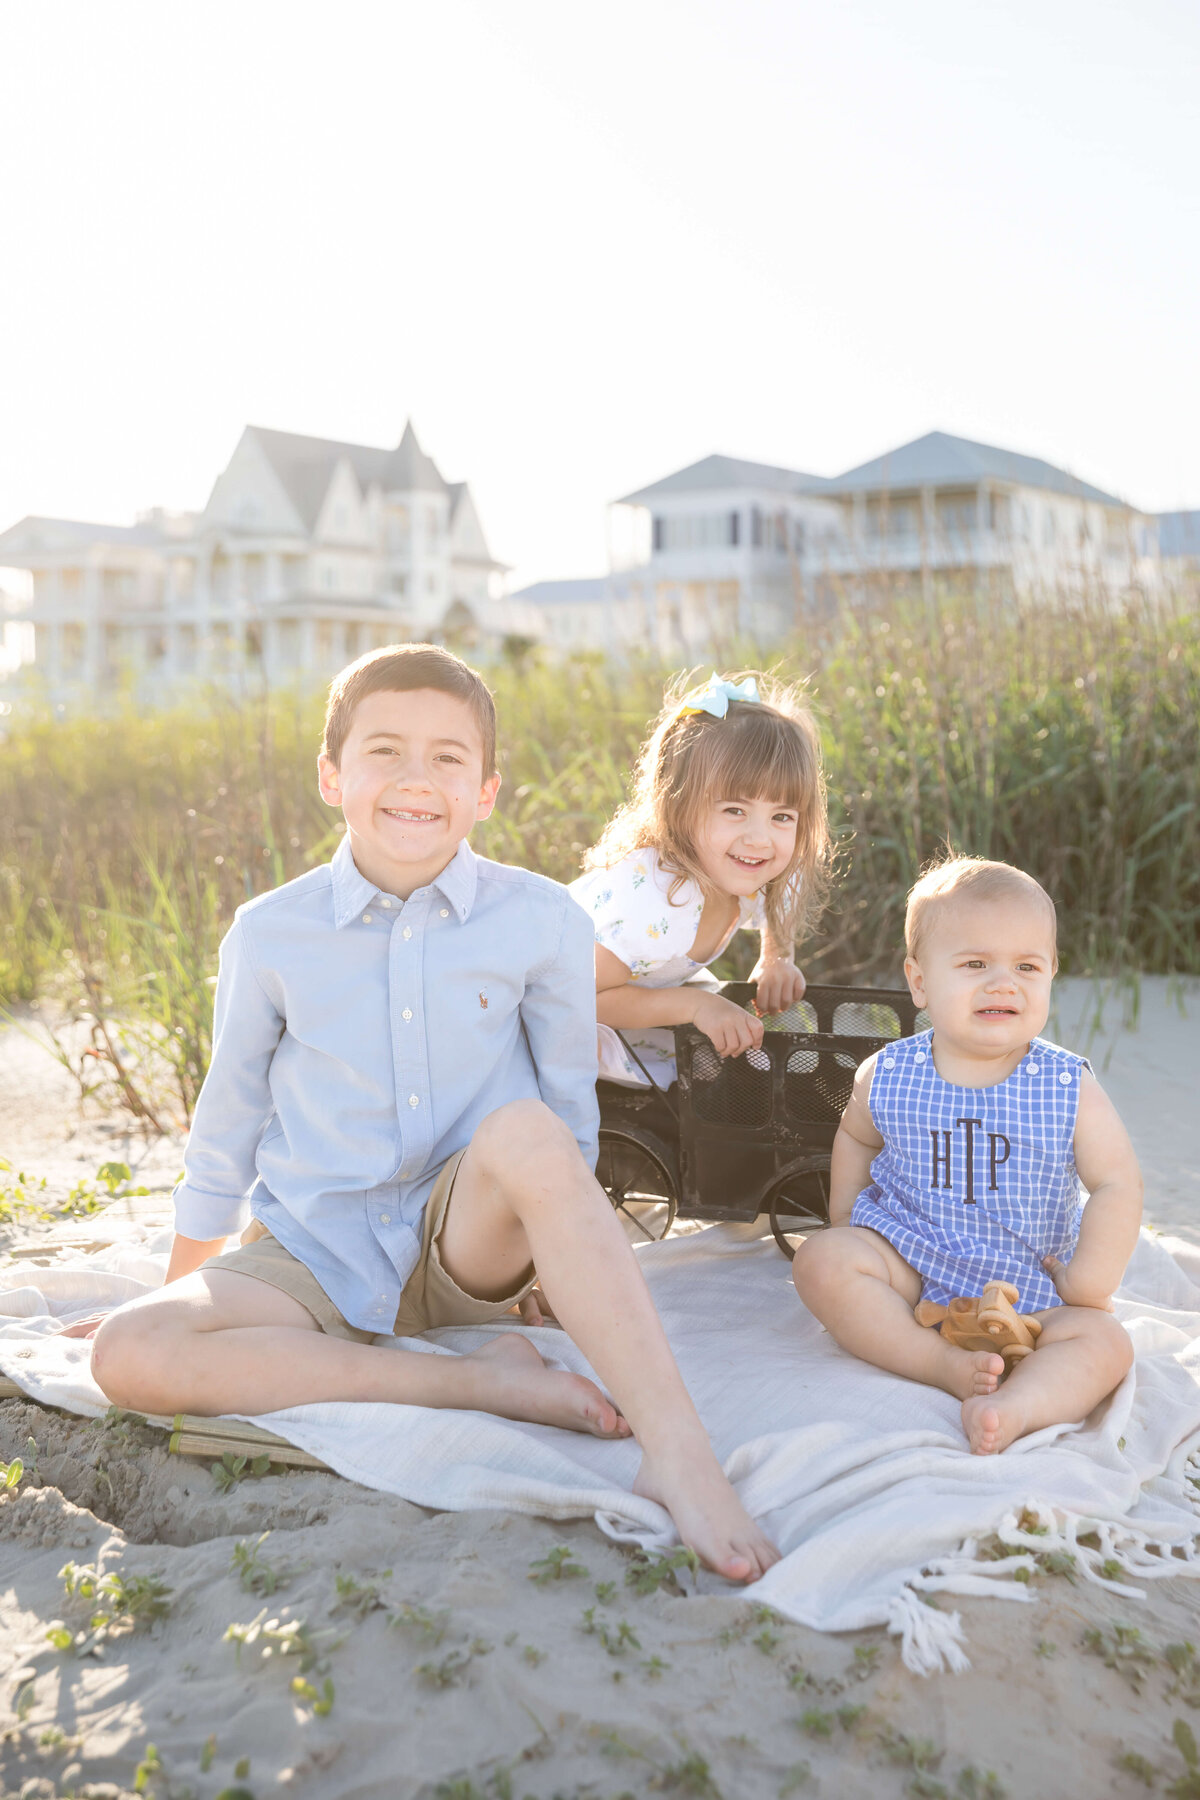 Traber_FamilySession_KobyBrownPhotography011